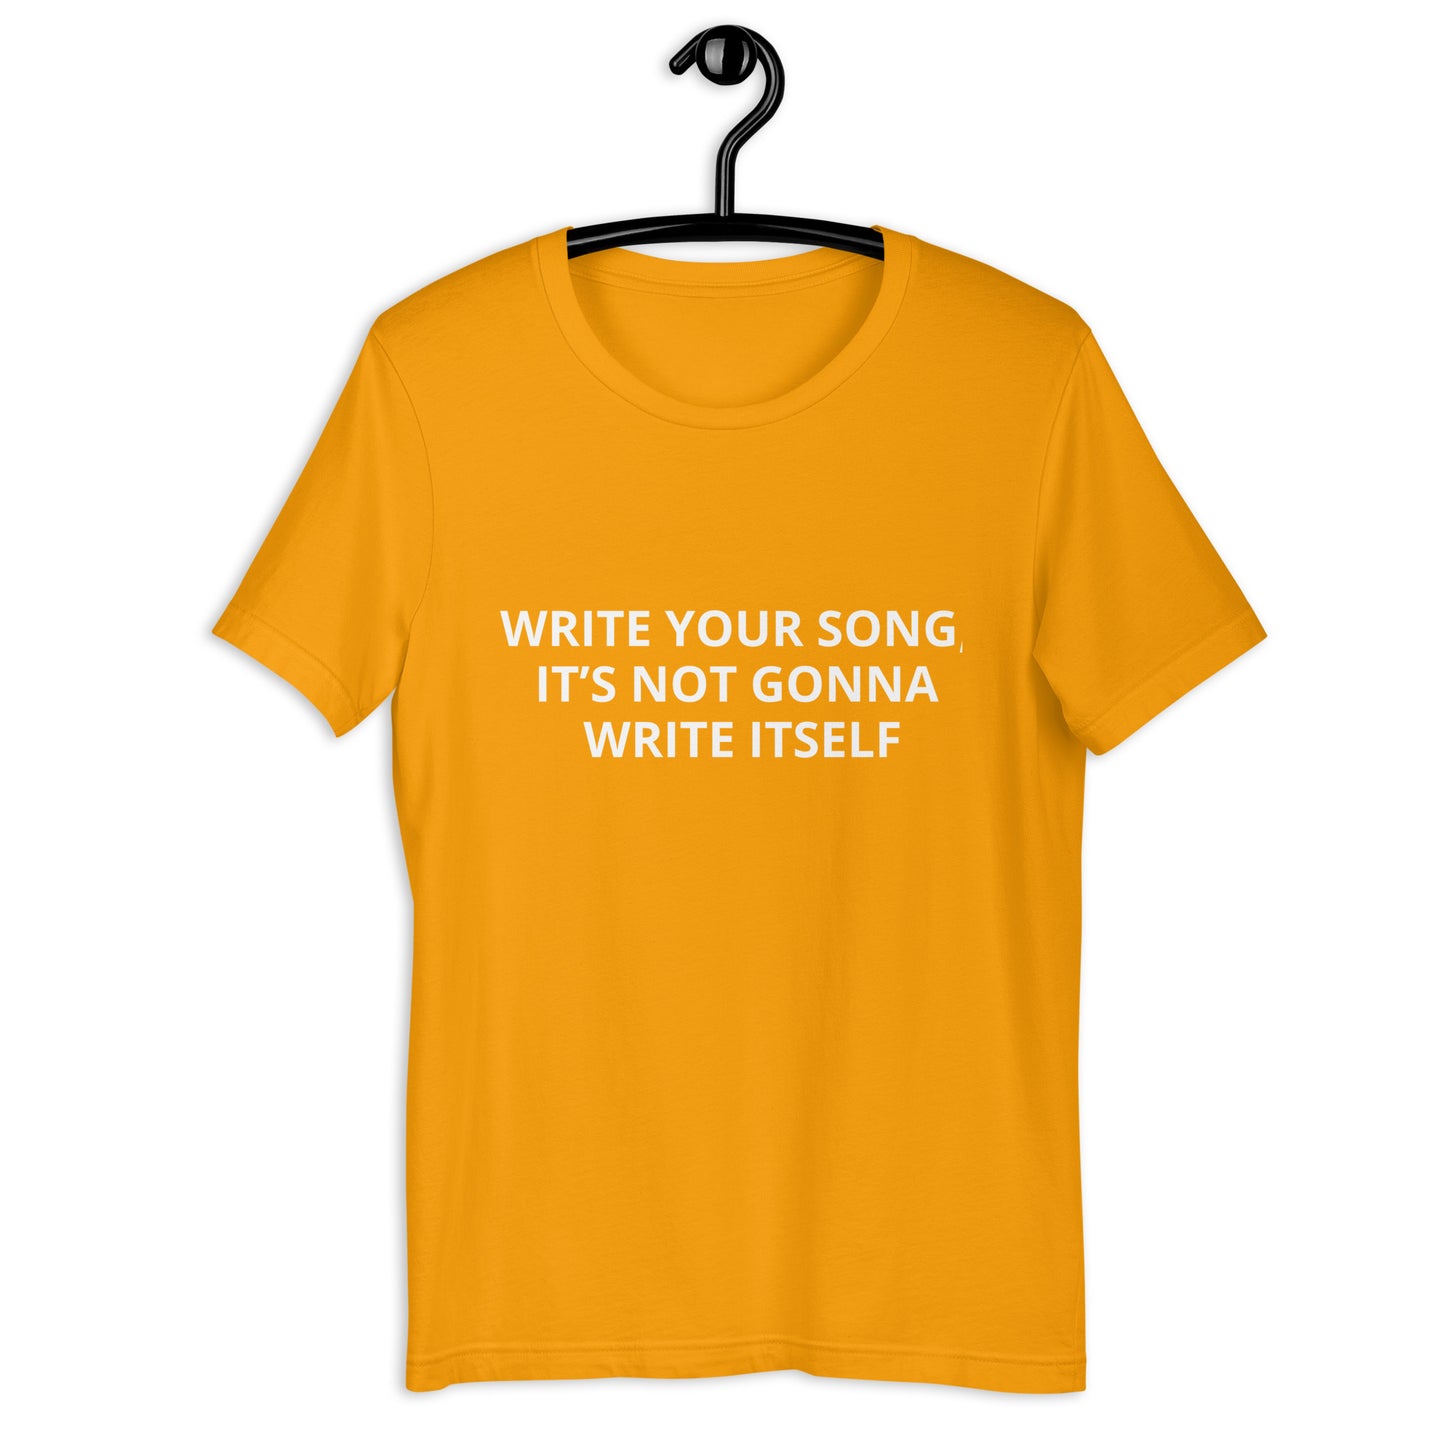 WRITE YOUR SONG, IT’S NOT GONNA WRITE ITSELF  Unisex t-shirt